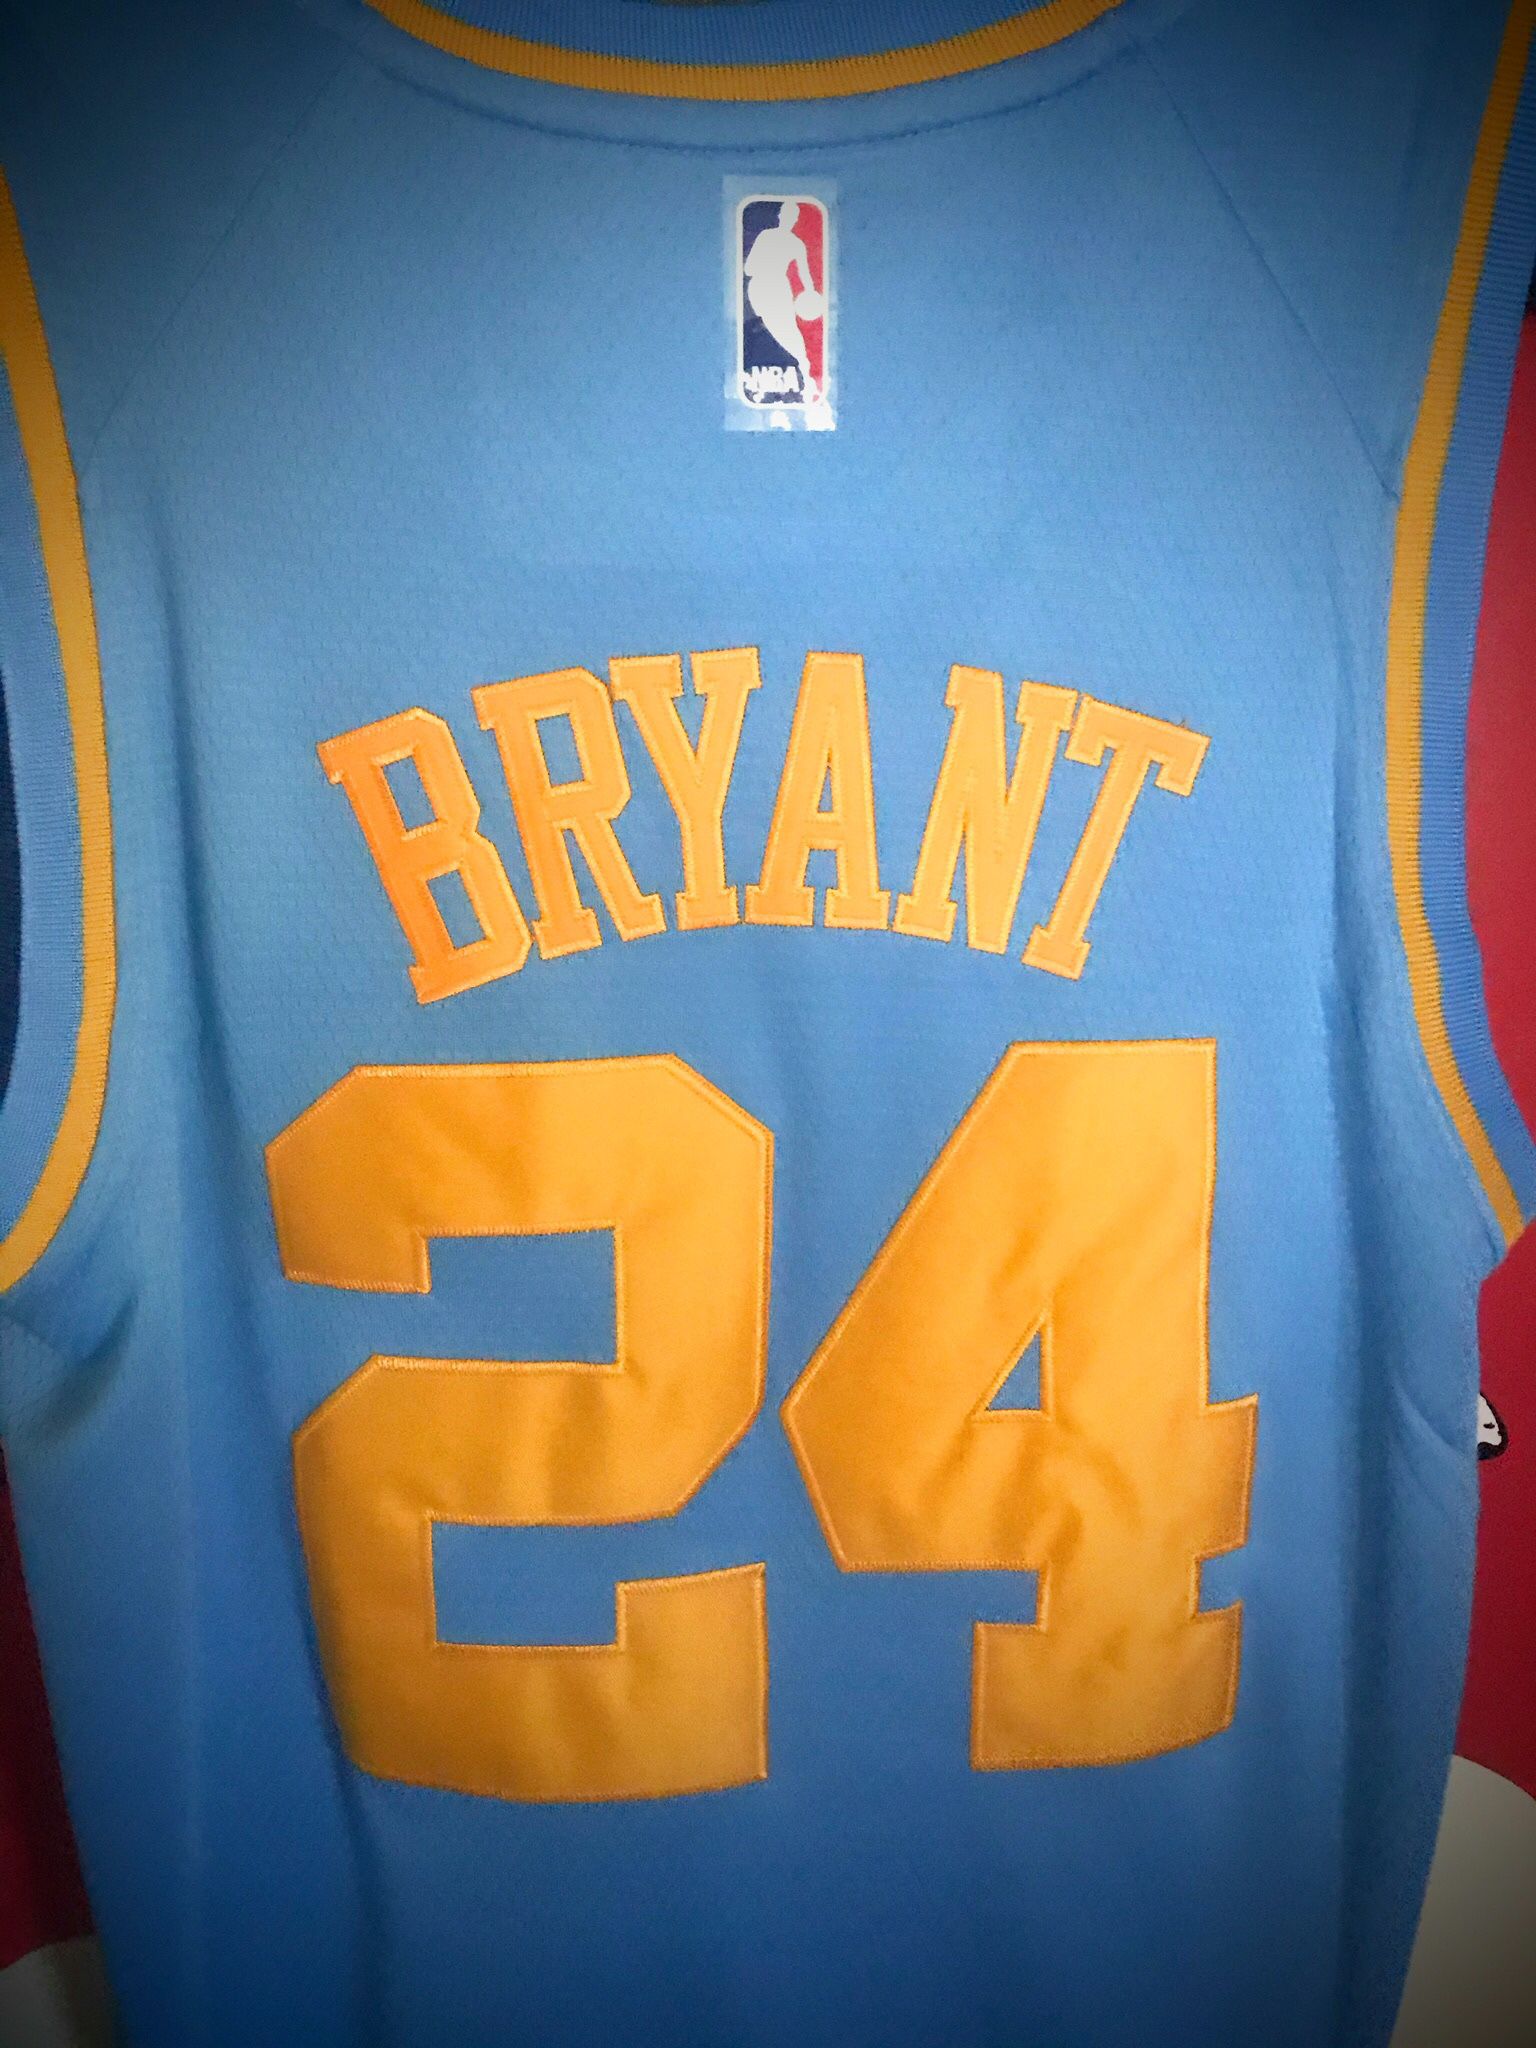 Kobe Bryant 2004-2005 Baby Blue Los Angeles Minneapolis Lakers  Mitchell&Ness Hardwood Classic Throwback Jersey #8 for Sale in Garden  Grove, CA - OfferUp